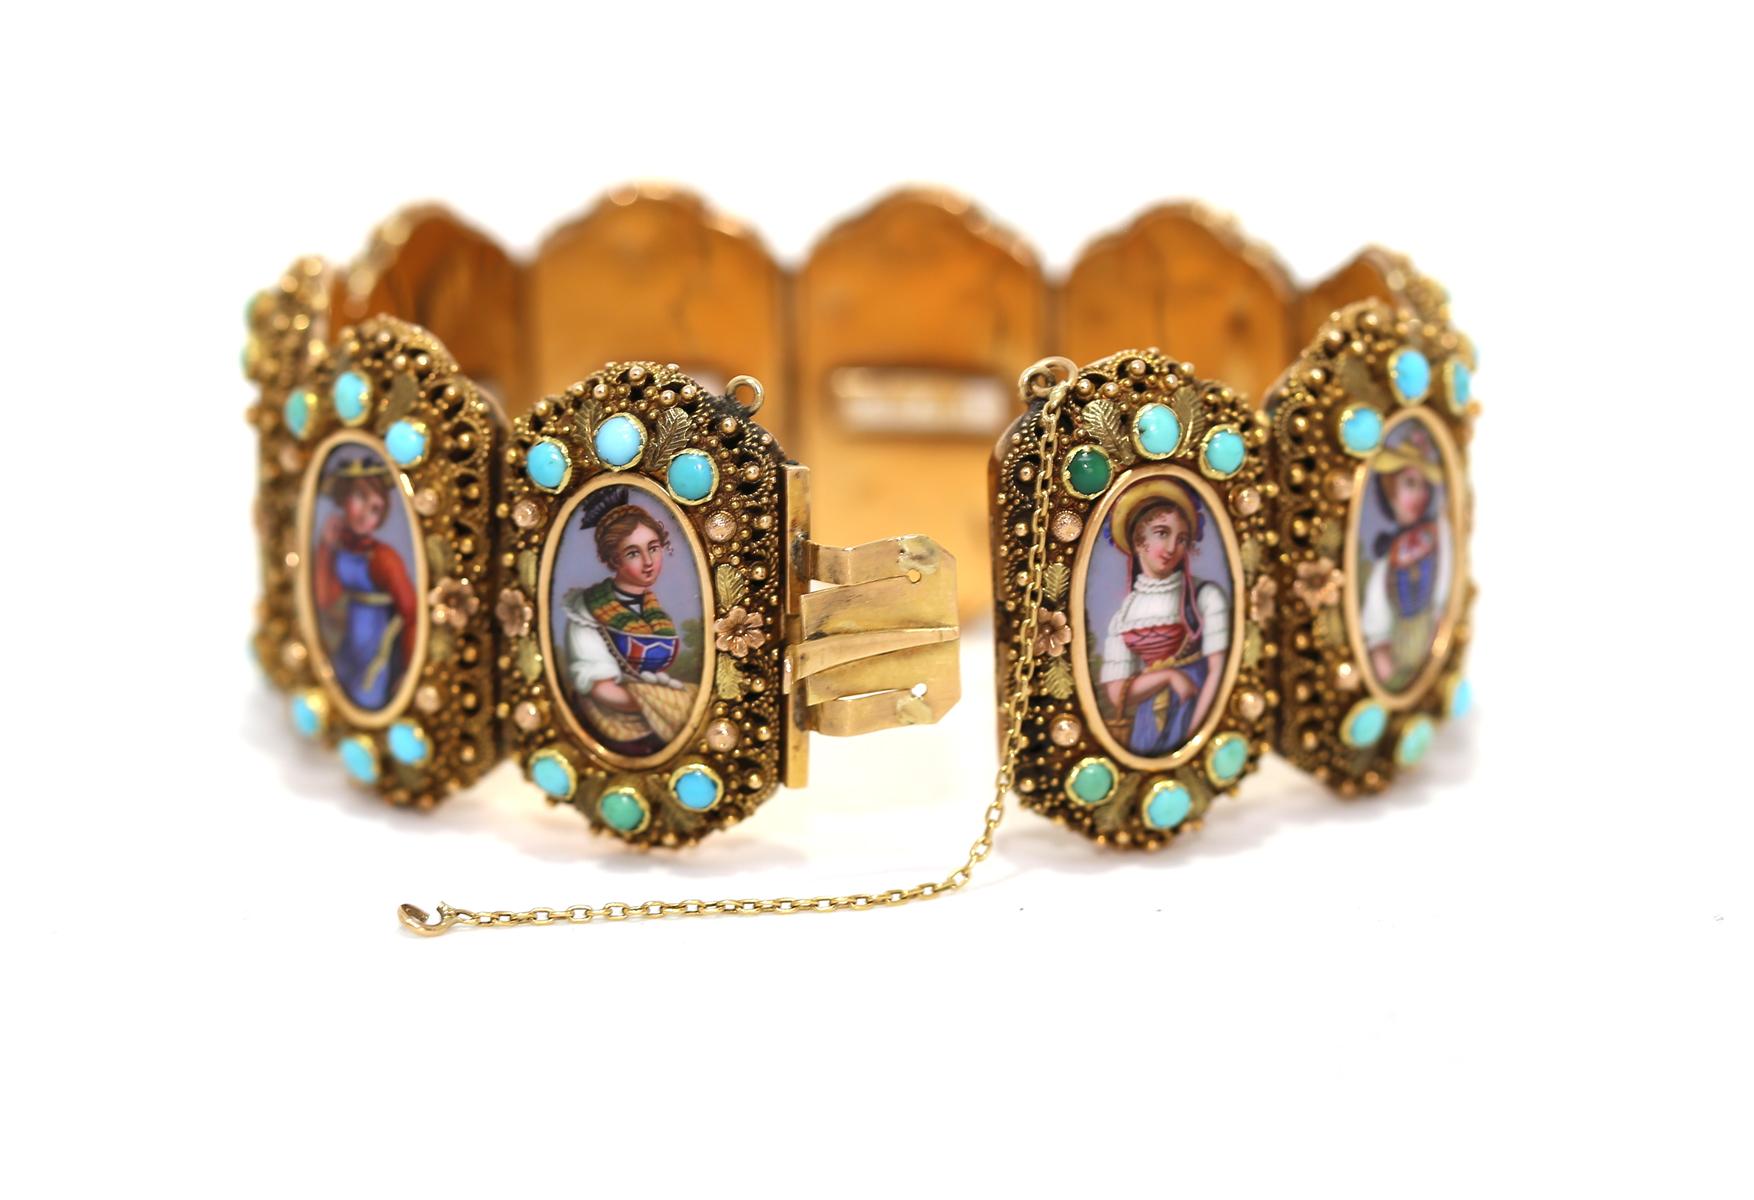  Locket Gold Bracelet Swiss Cantons Hand-Painted Ladies Turquoise, 1860 3